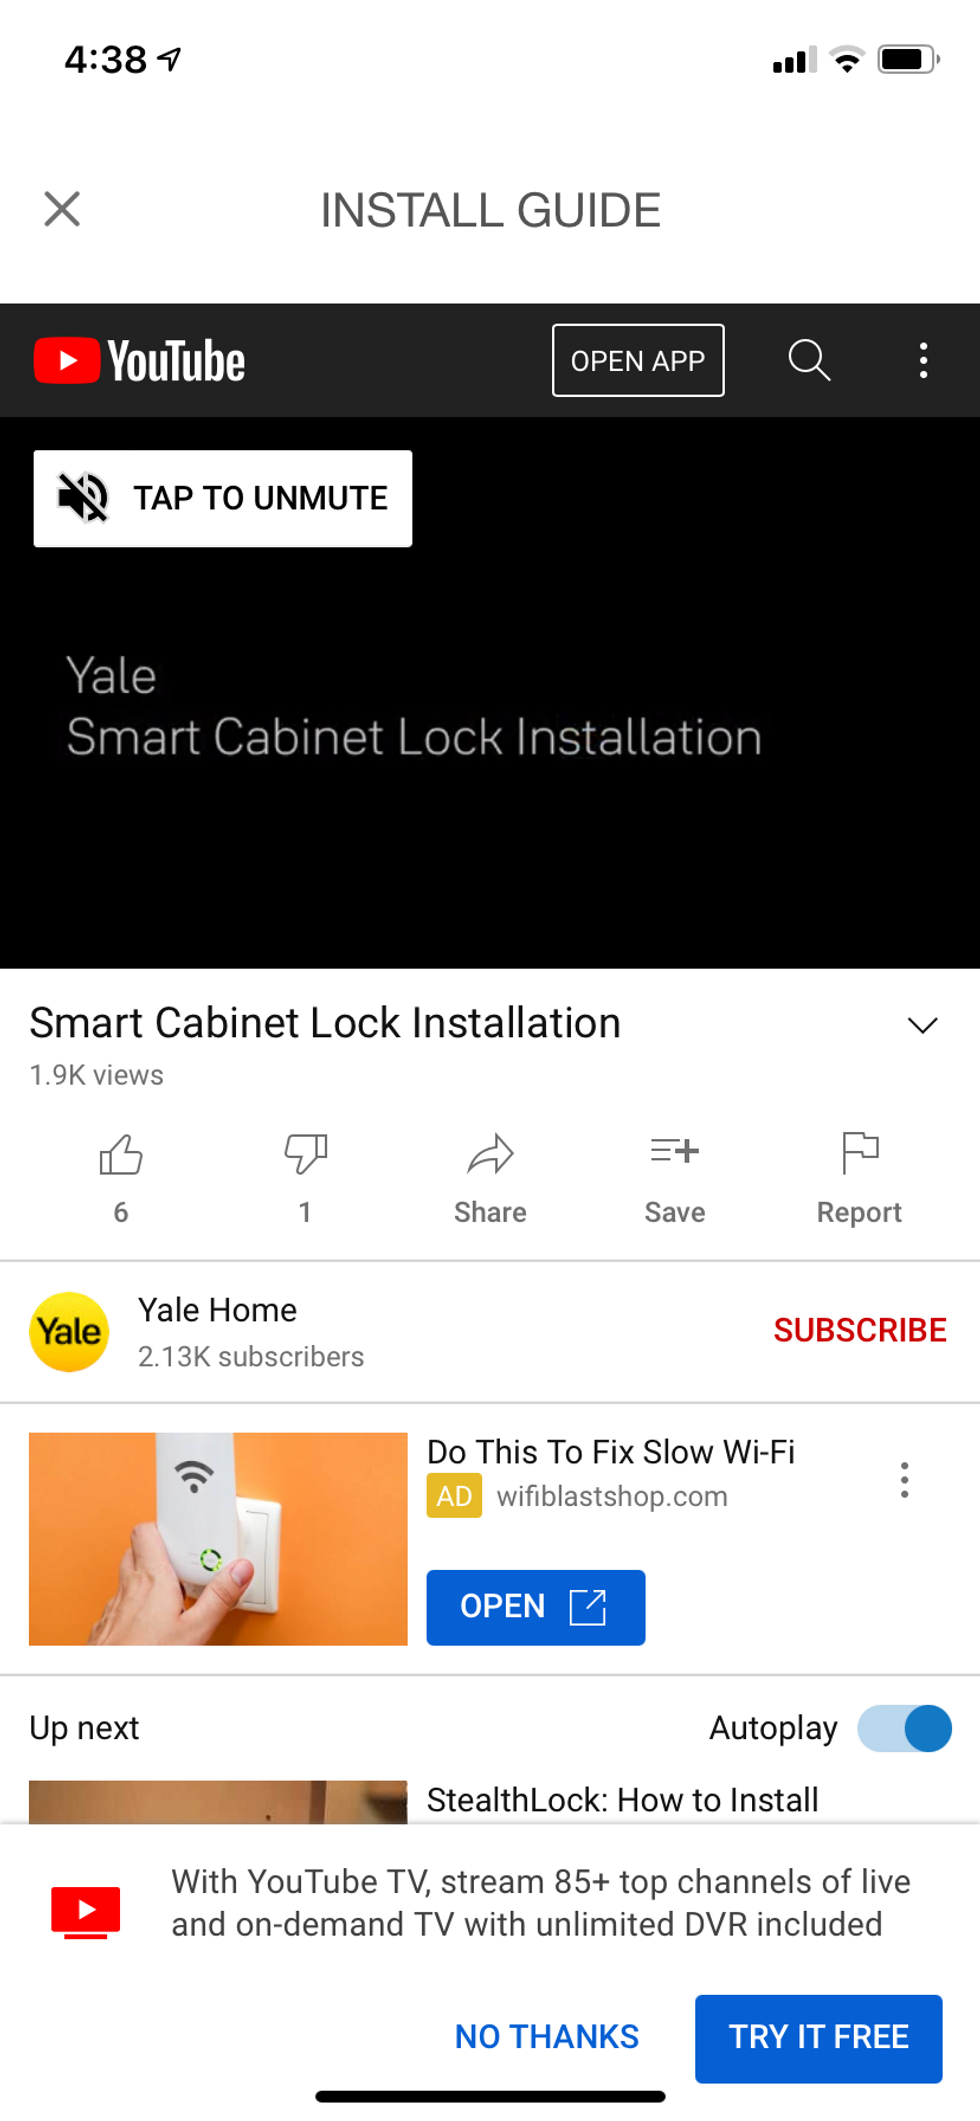 Yale app for instructions on installation for cabinet lock.